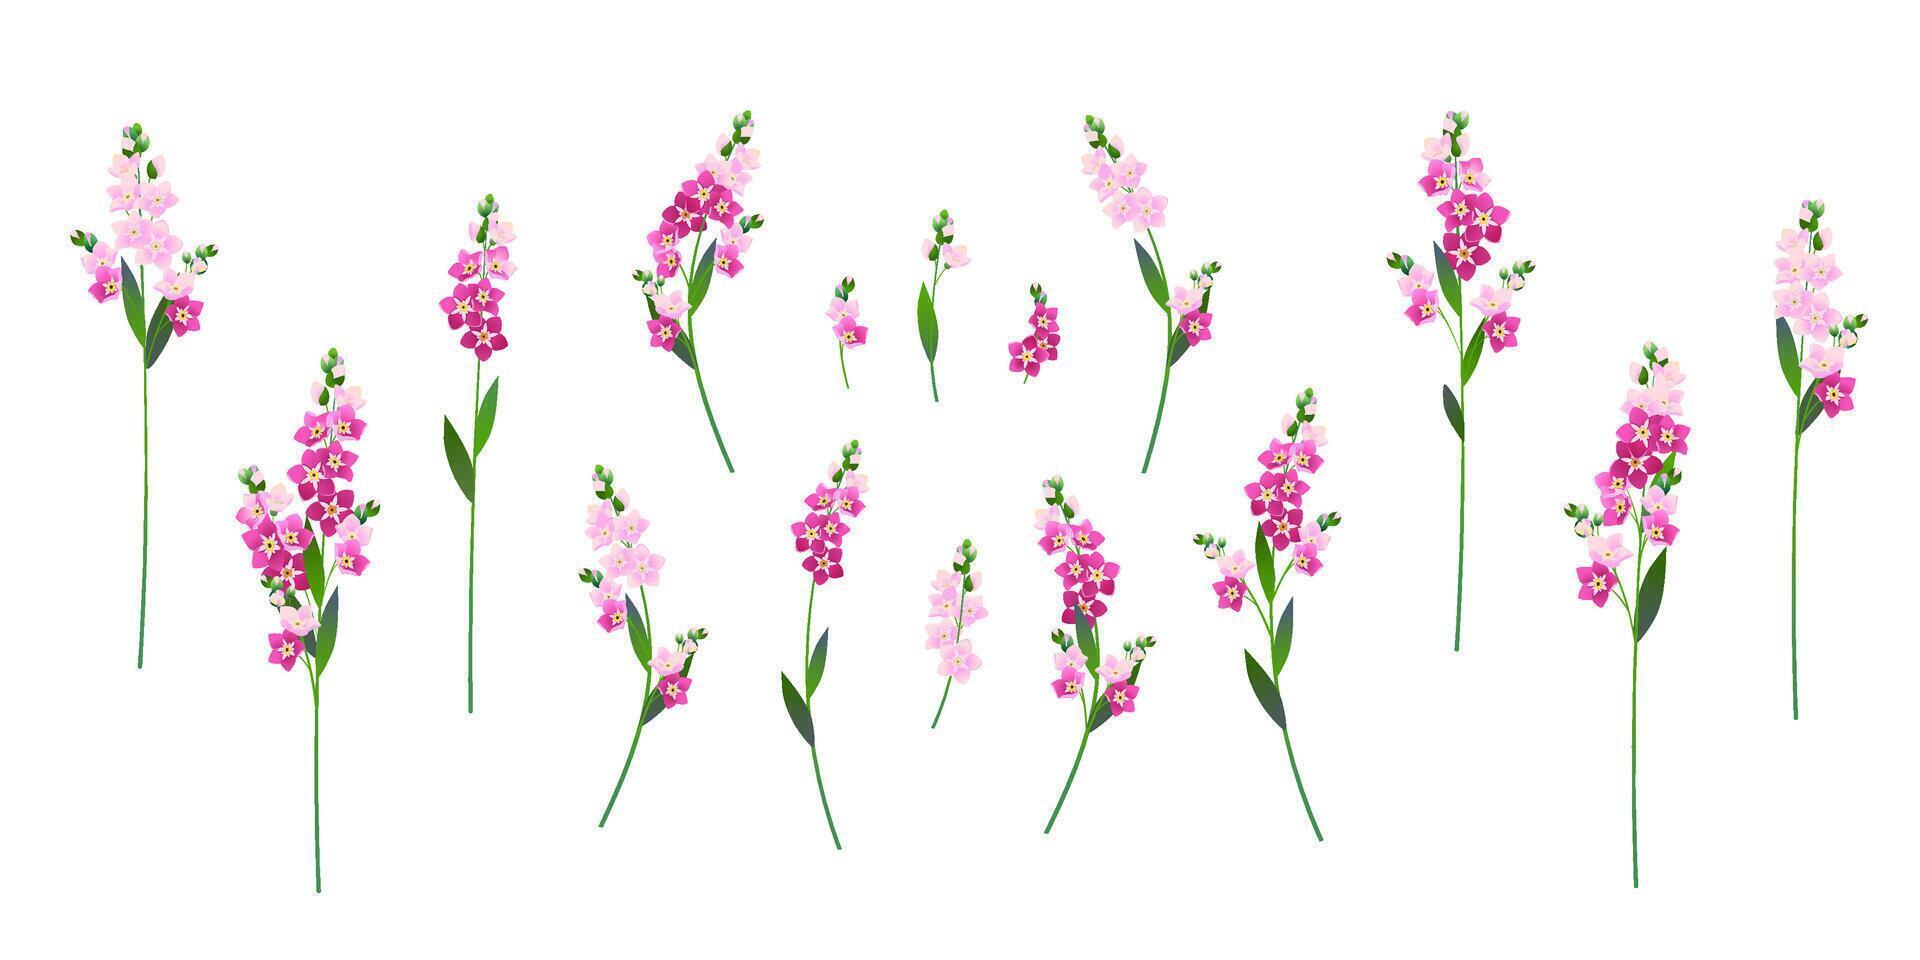 Forget Me Not Flower. Pink spring flowers vector